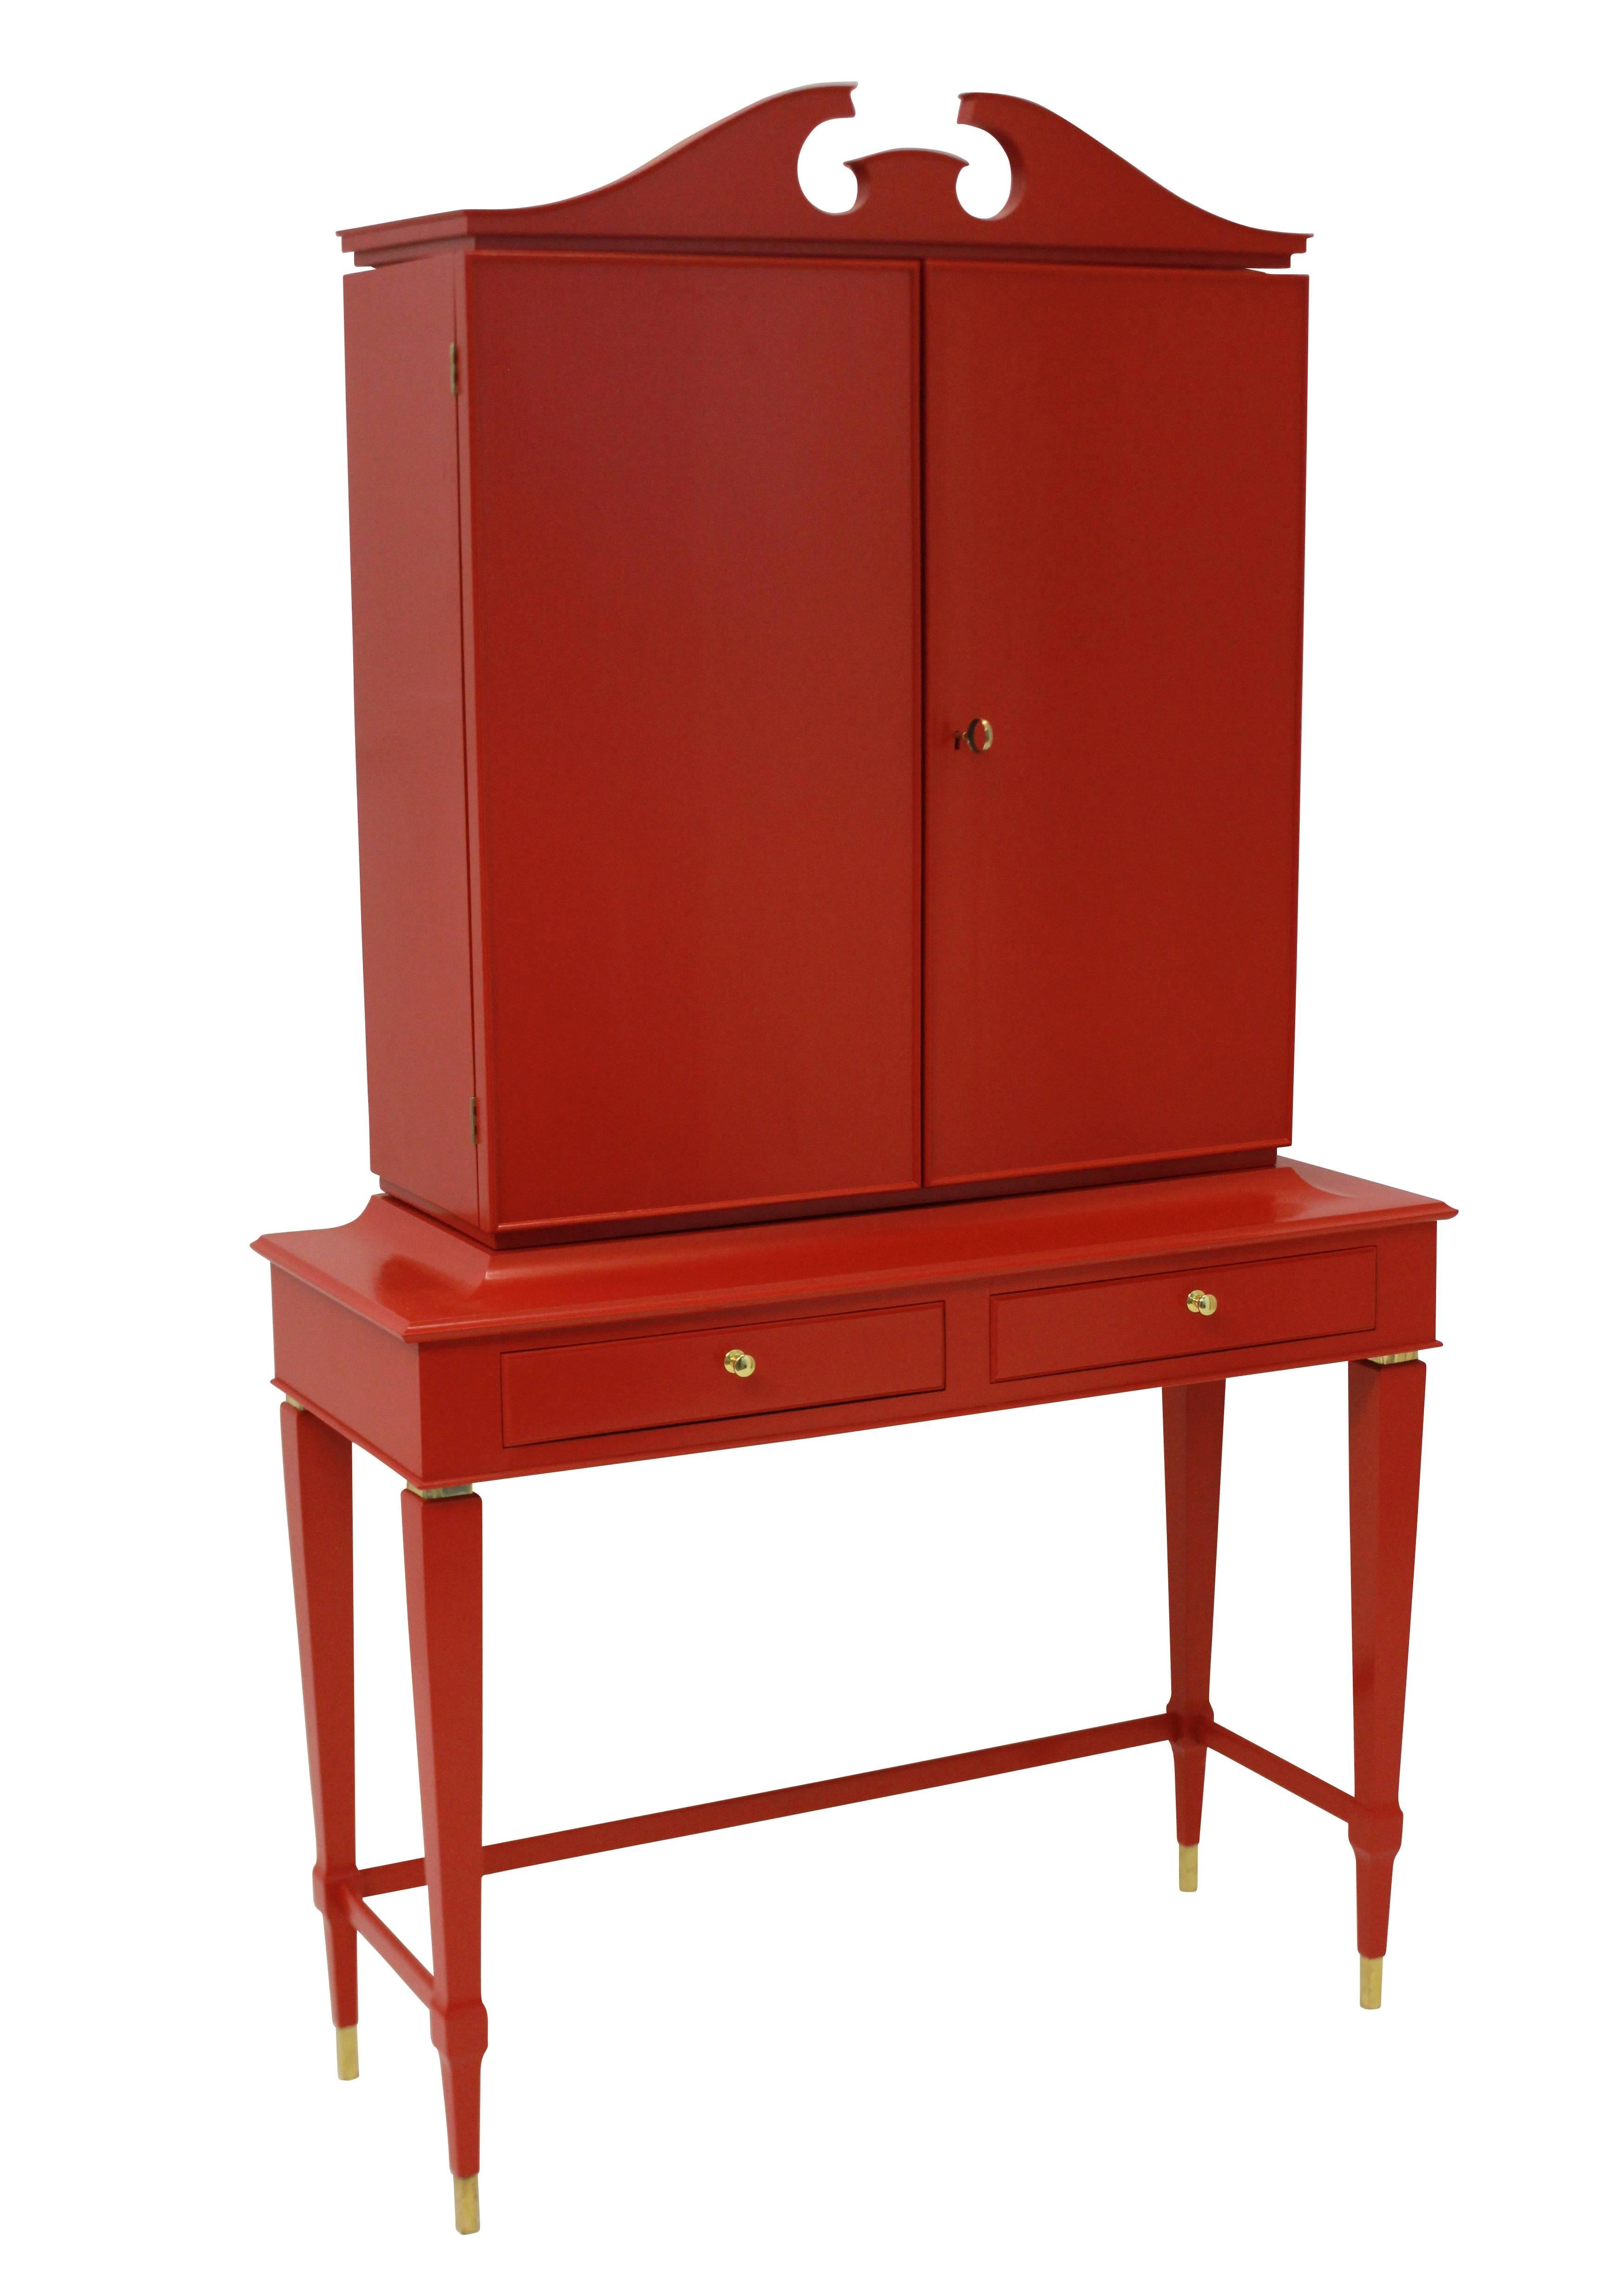 An Italian architectural bar cabinet of fine quality by Paolo Buffa. In red lacquered rosewood with a fitted interior and two frieze drawers.